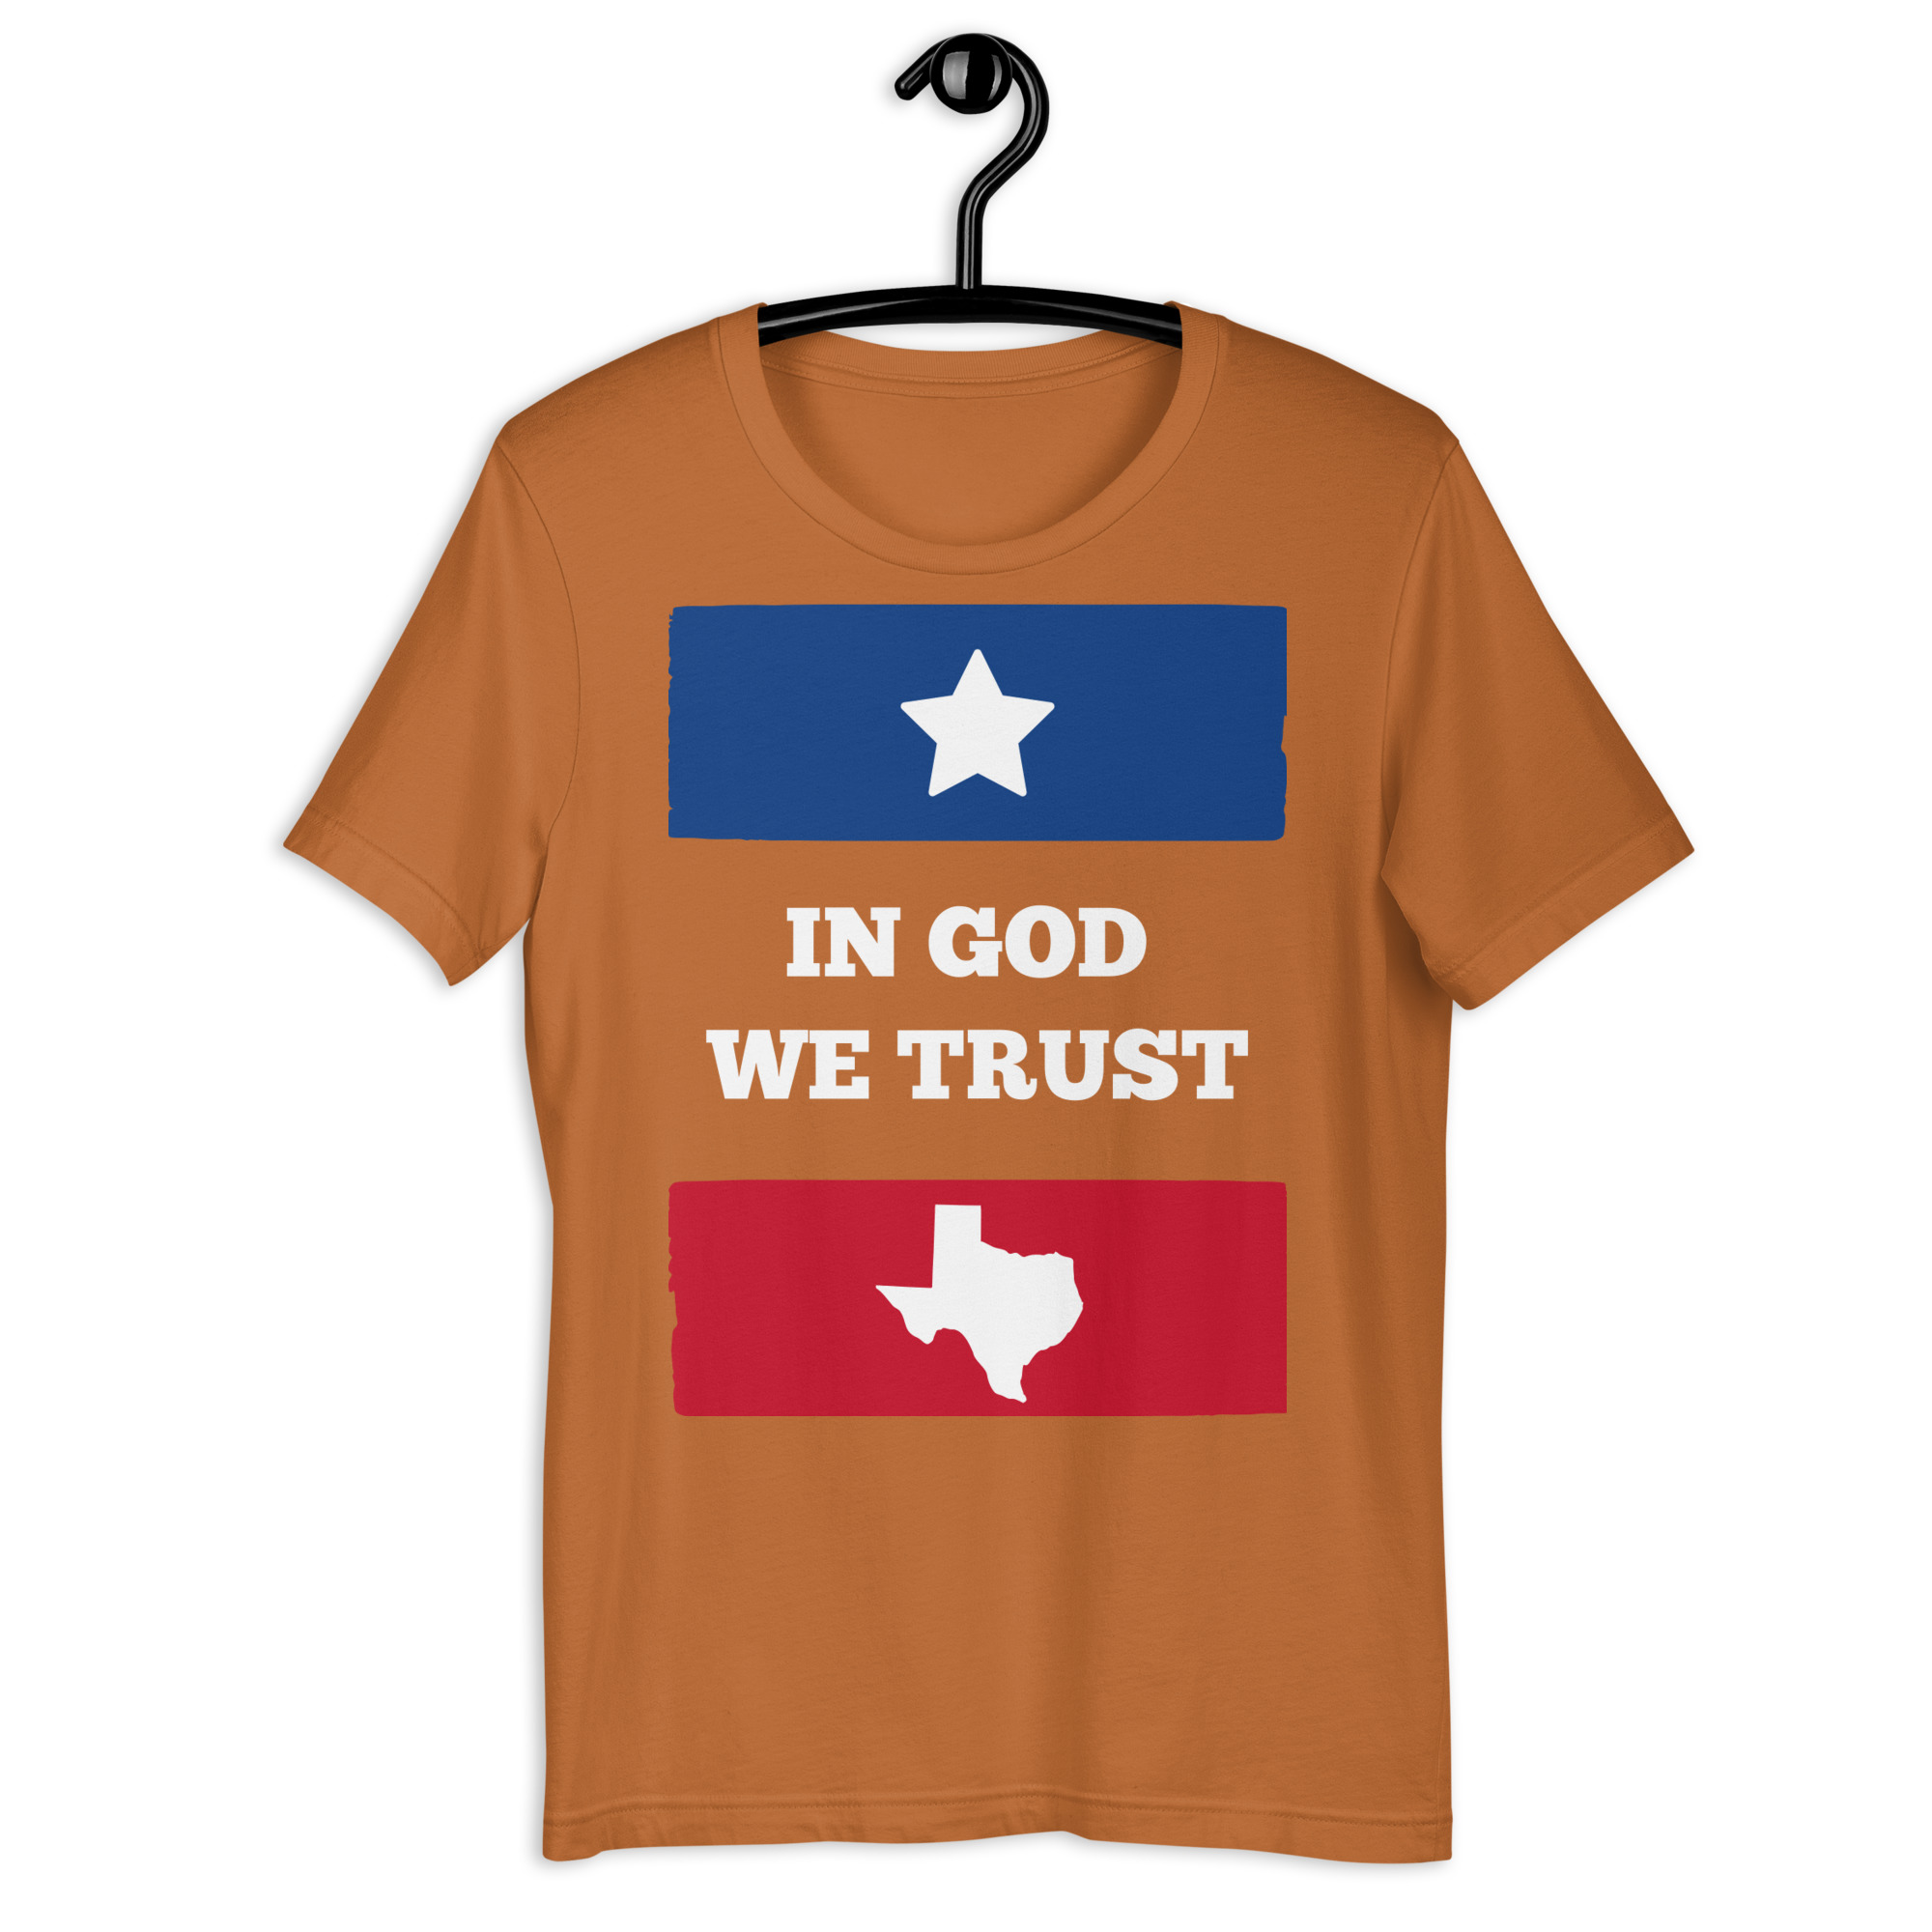 In GOD we TRUST #TEXAS –  Don’t mess with Texas style Short-Sleeve Unisex T-Shirt